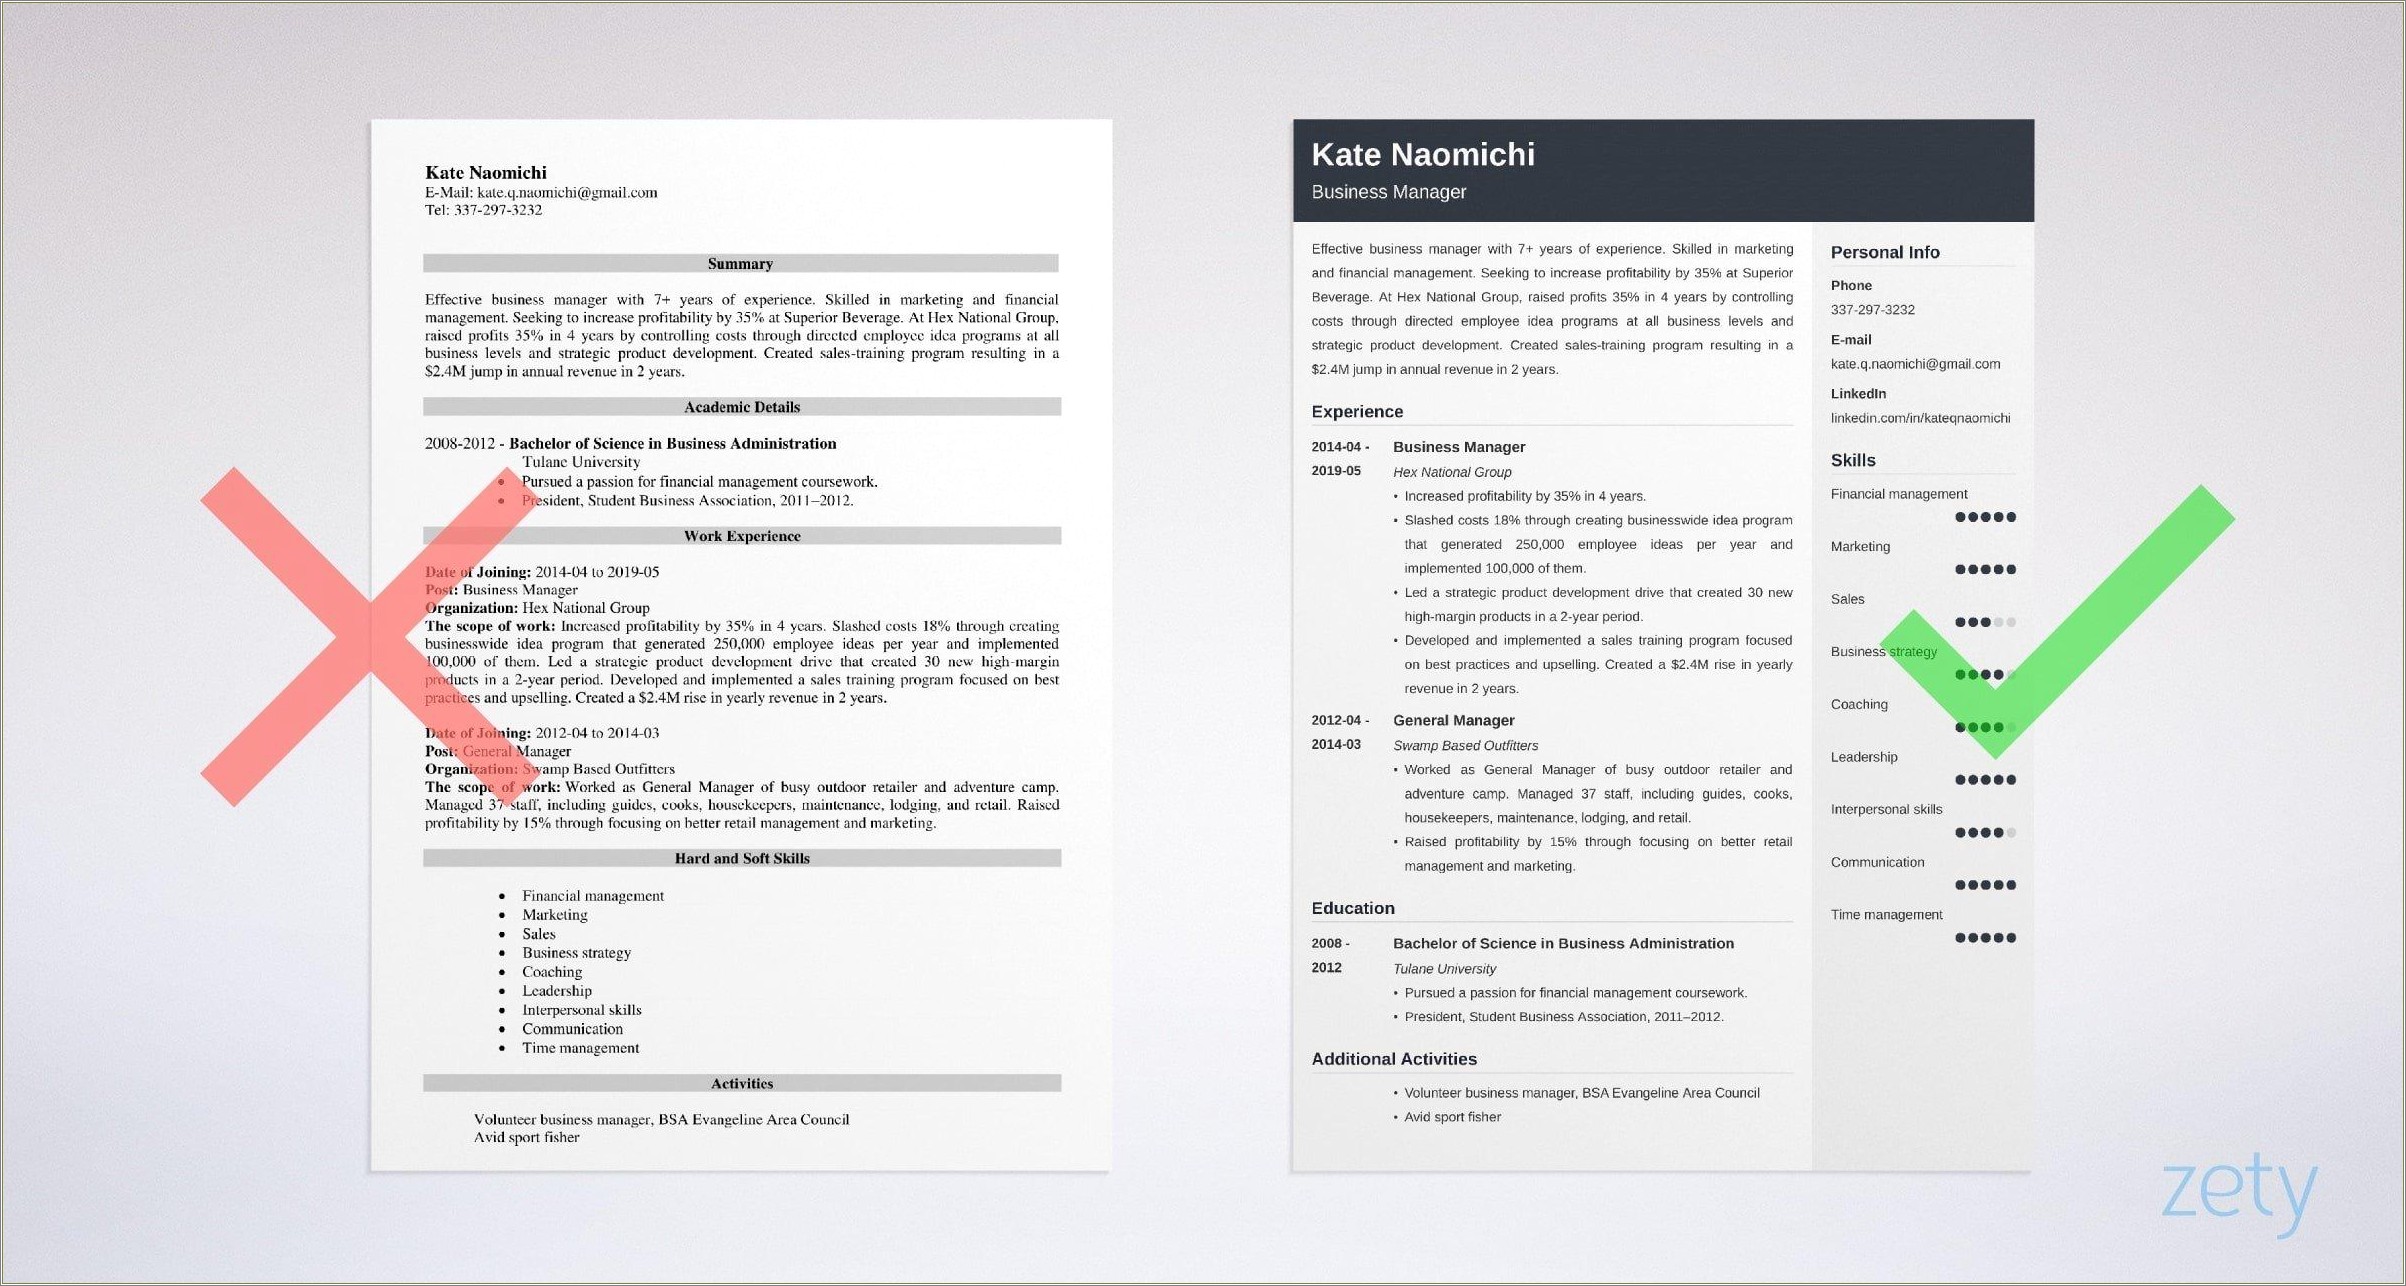 Resume For The Post Of Finance Manager